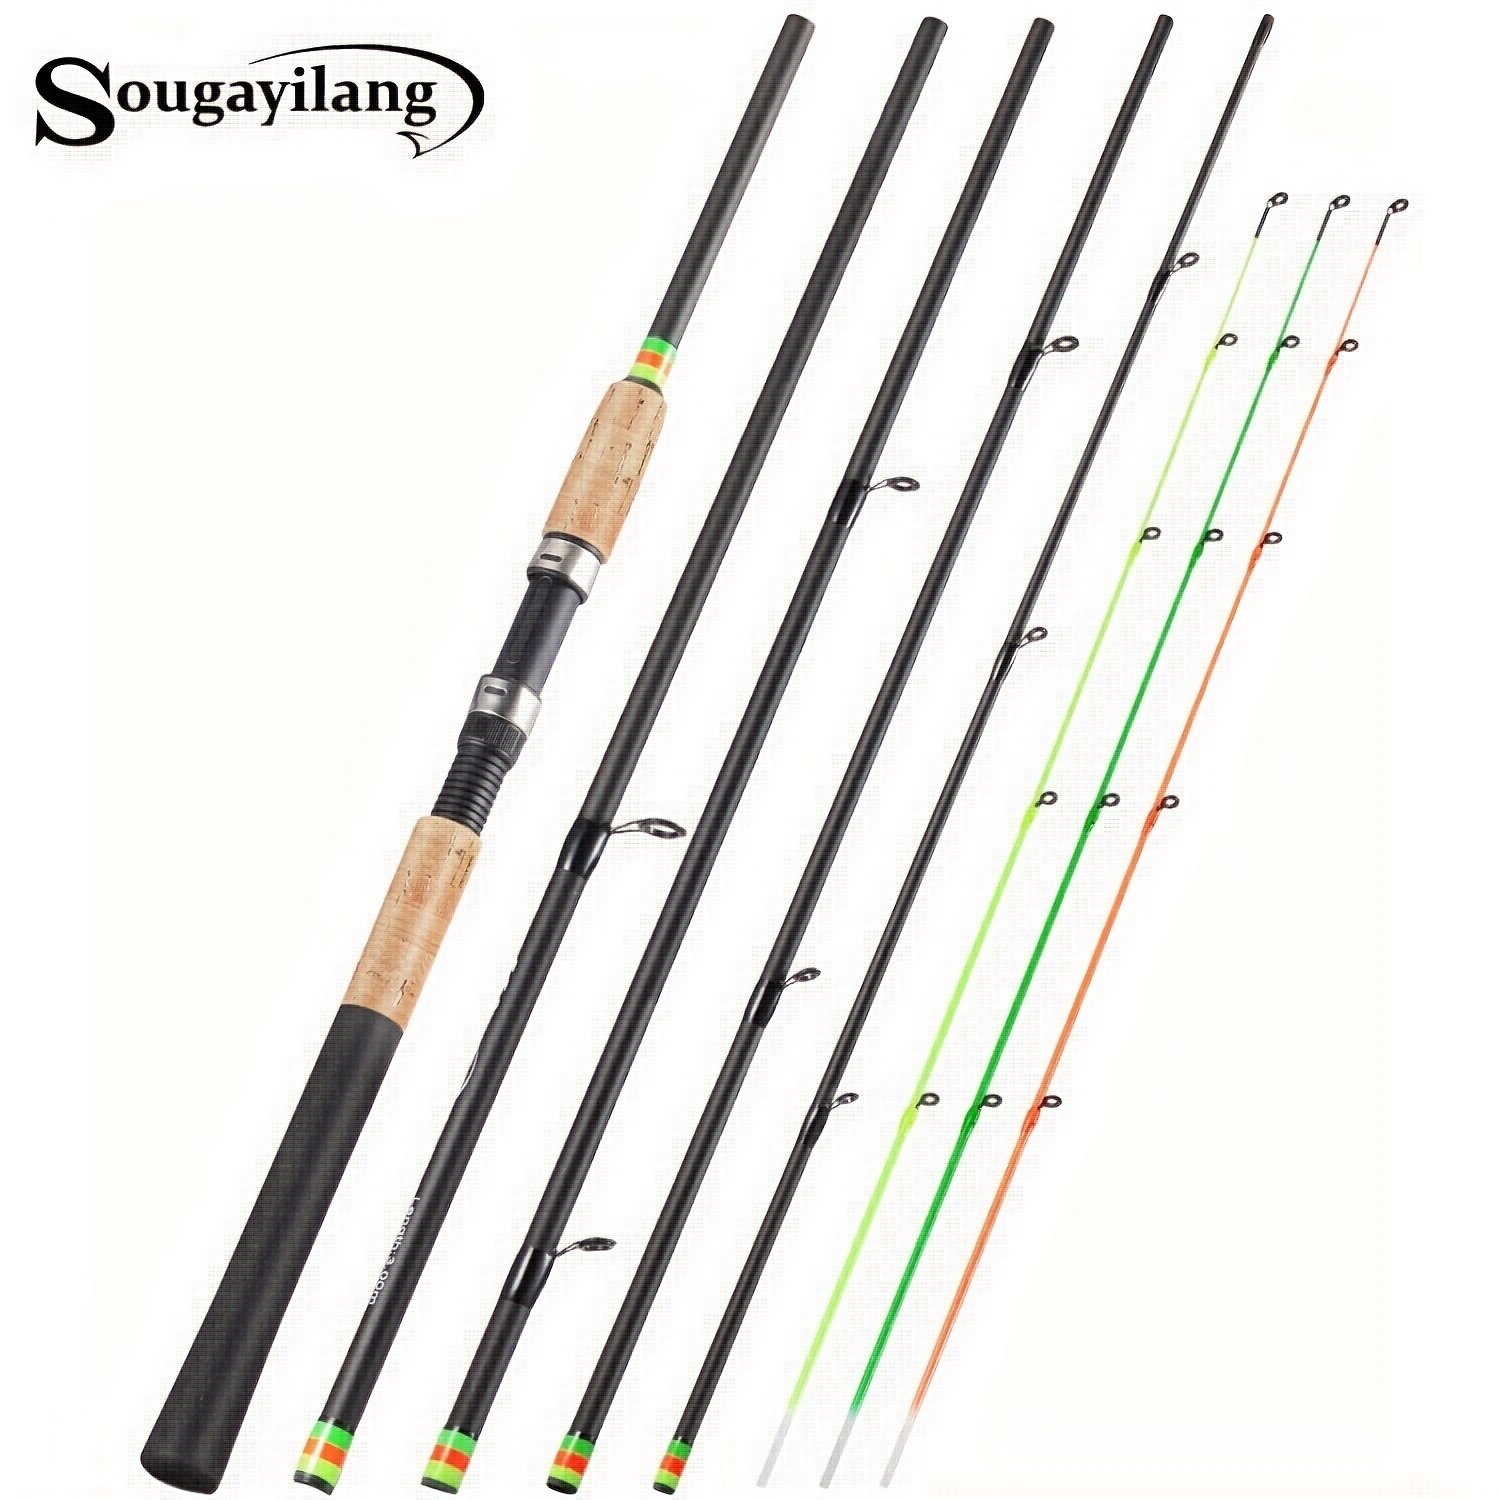  Fishing Rod Portable 1.98m Fishing Combo Portable 4 Sections  Casting Fishing Rods and Baitcasting Reels Set Fishing Tools for Beginners  Adult Fishing Pole Travel : Sports & Outdoors